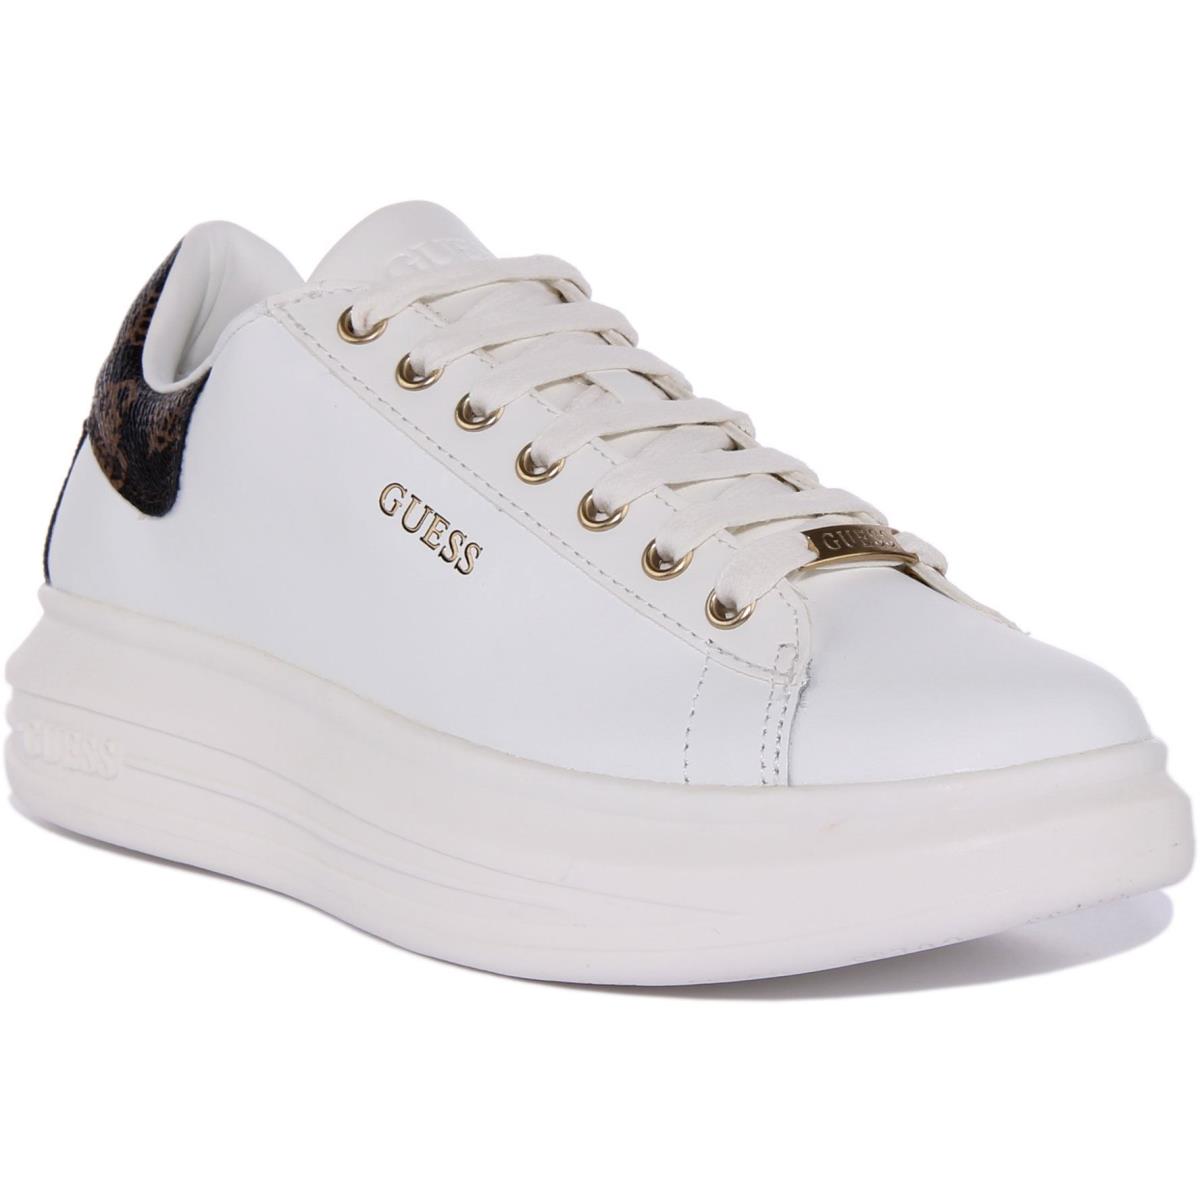 Guess Vibo Fl7Rnofal12 Womens Thick Sole Sneakers In White Brown Size US 5 - 11 WHITE BROWN